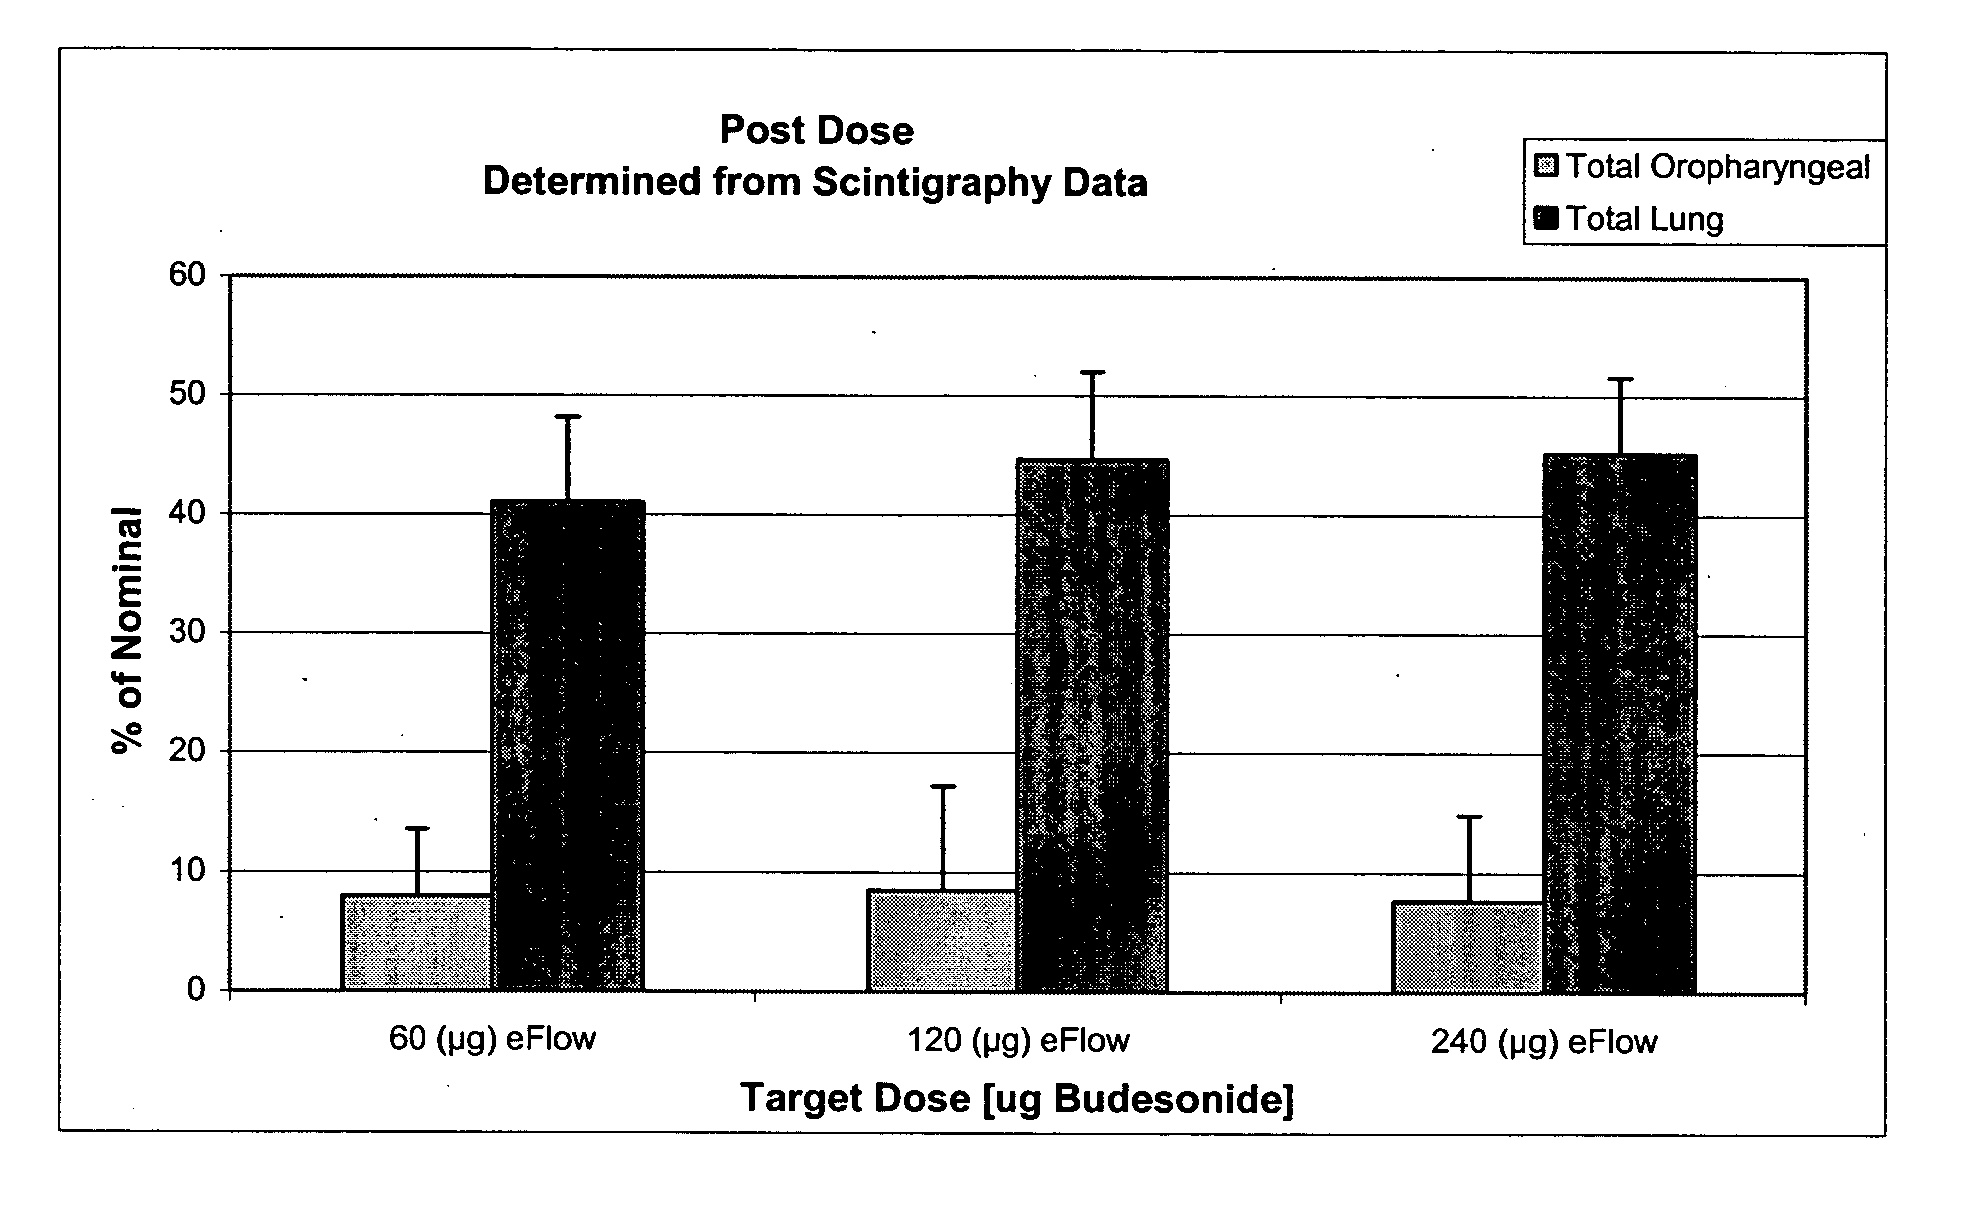 Systems and methods for the delivery of corticosteroids having an increased lung deposition